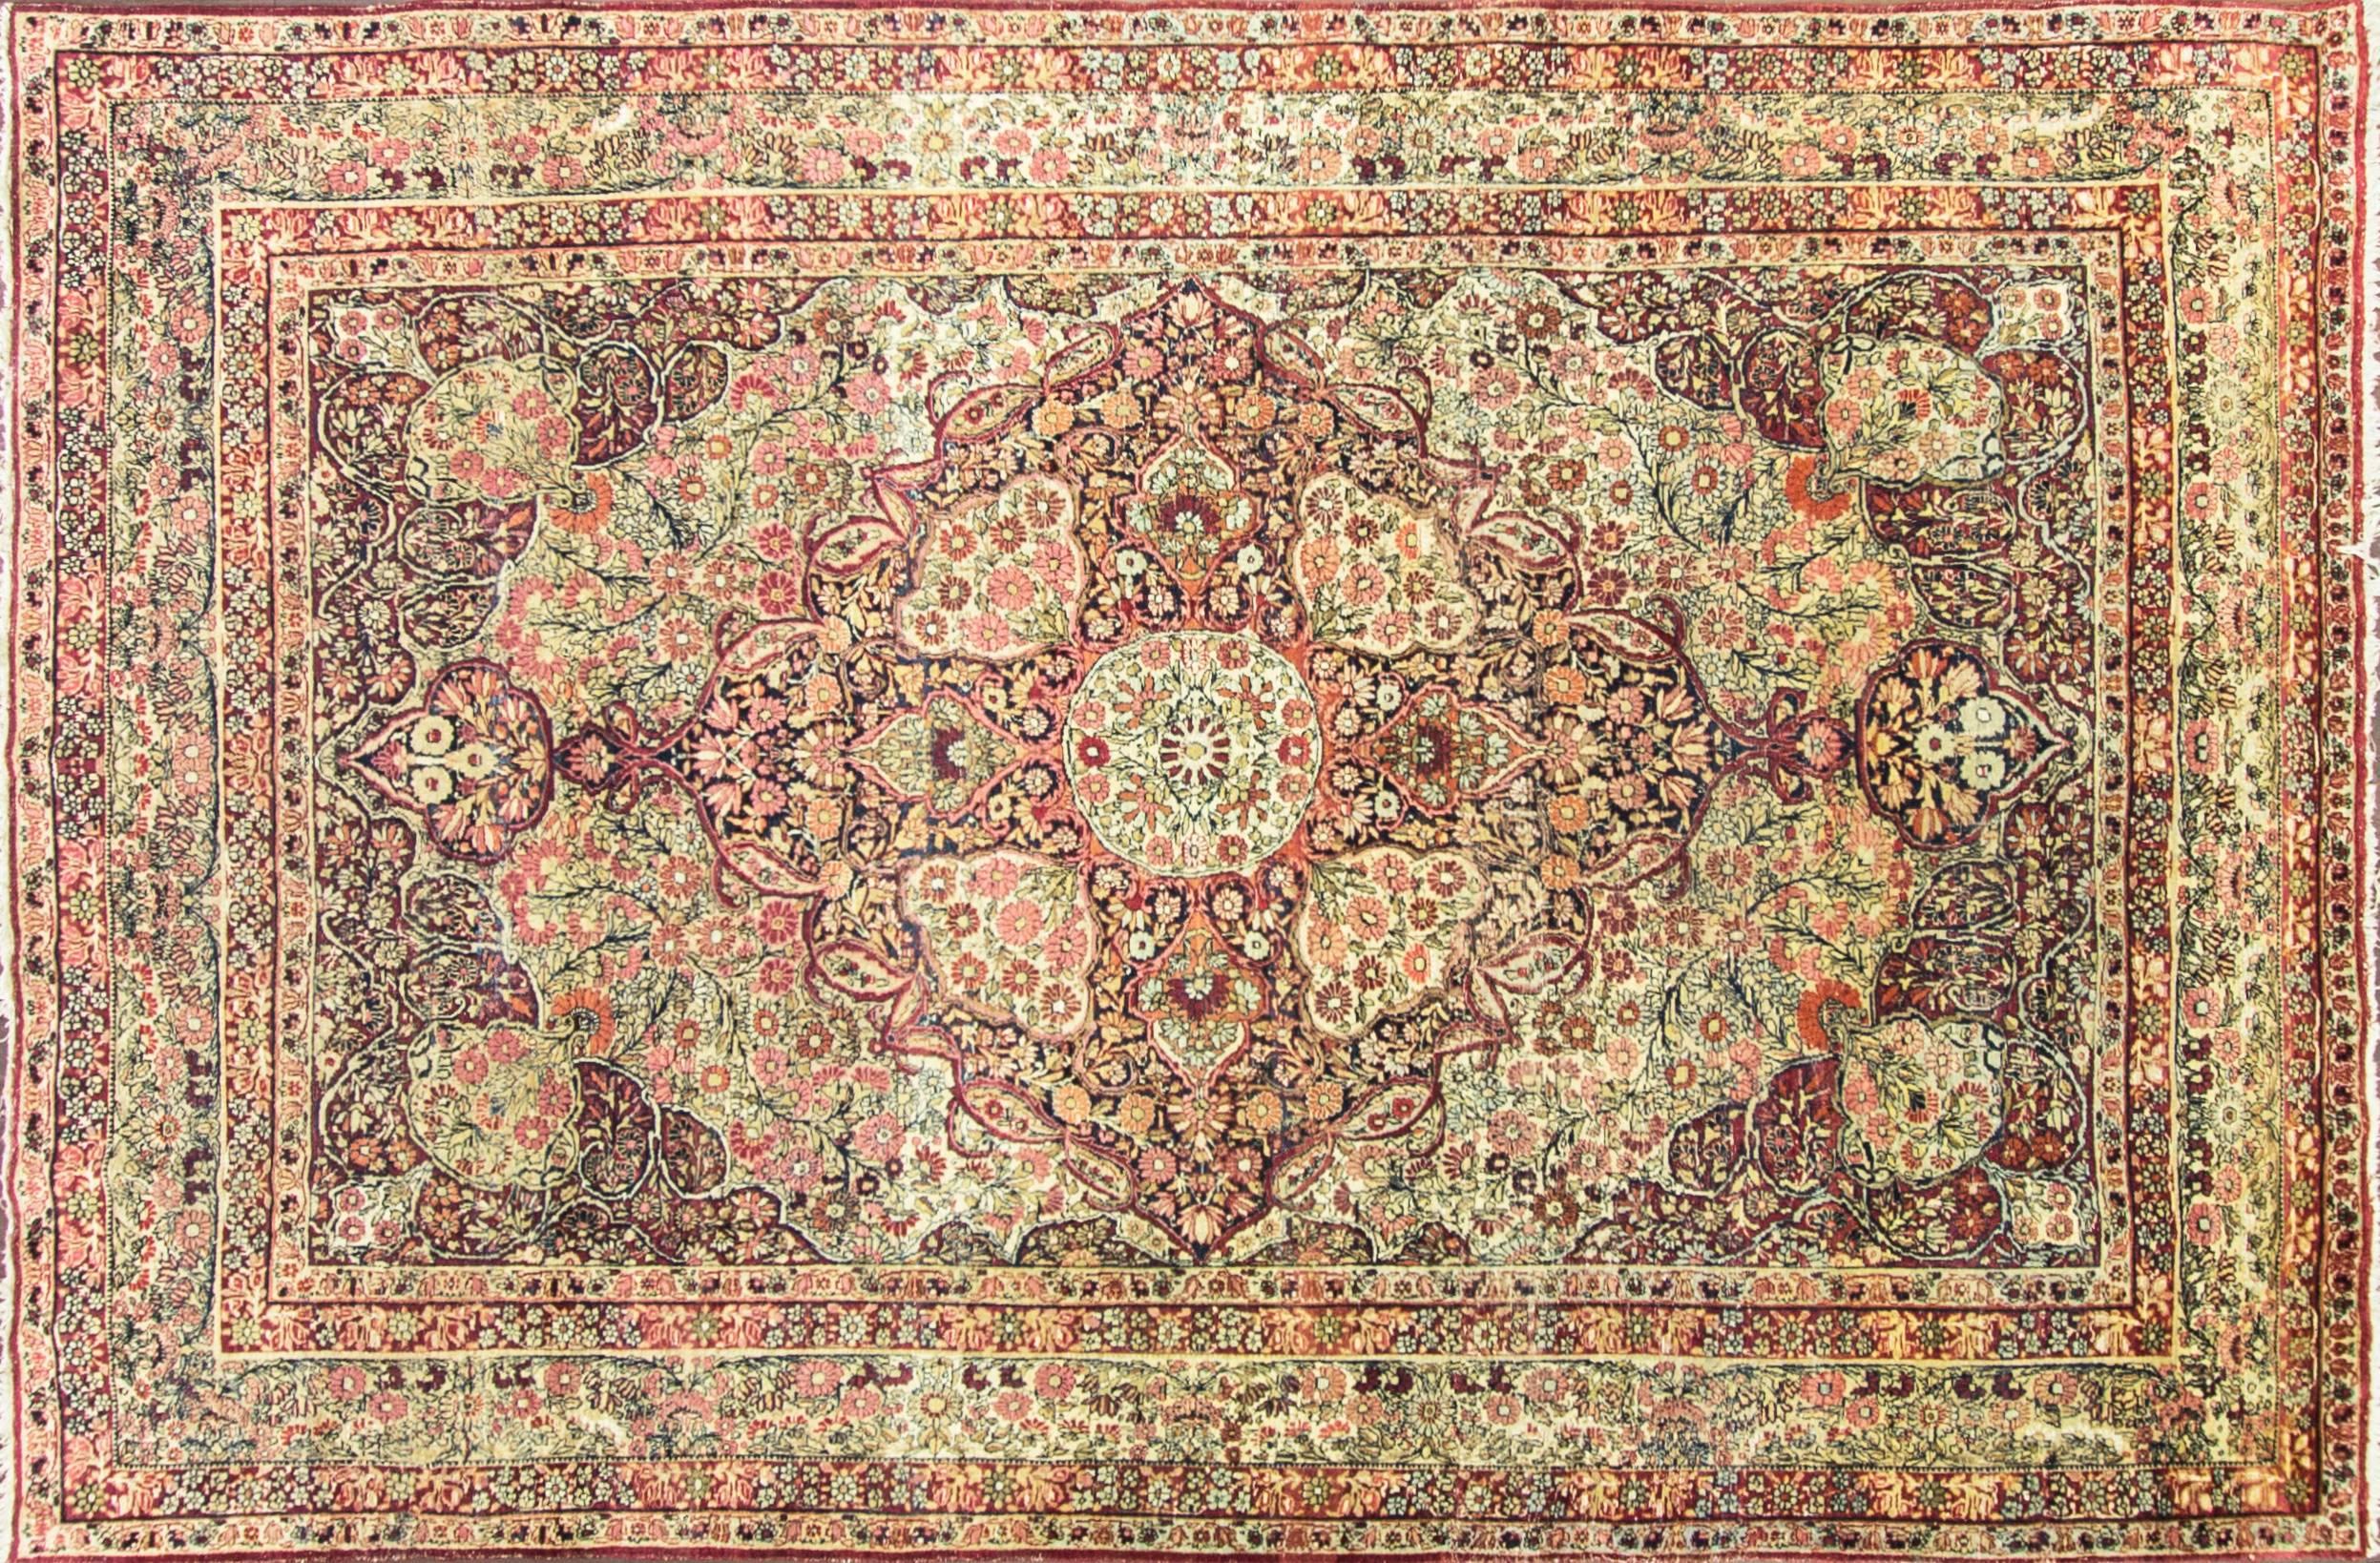 Striking antique Kermanshah rug, circa 1880. The rug has a fine weave and pleasant colors. Kirman was a very important antique rug weaving center dating from the Golden Age of Persian culture under the Safavid Dynasty in the 16th century, on a par